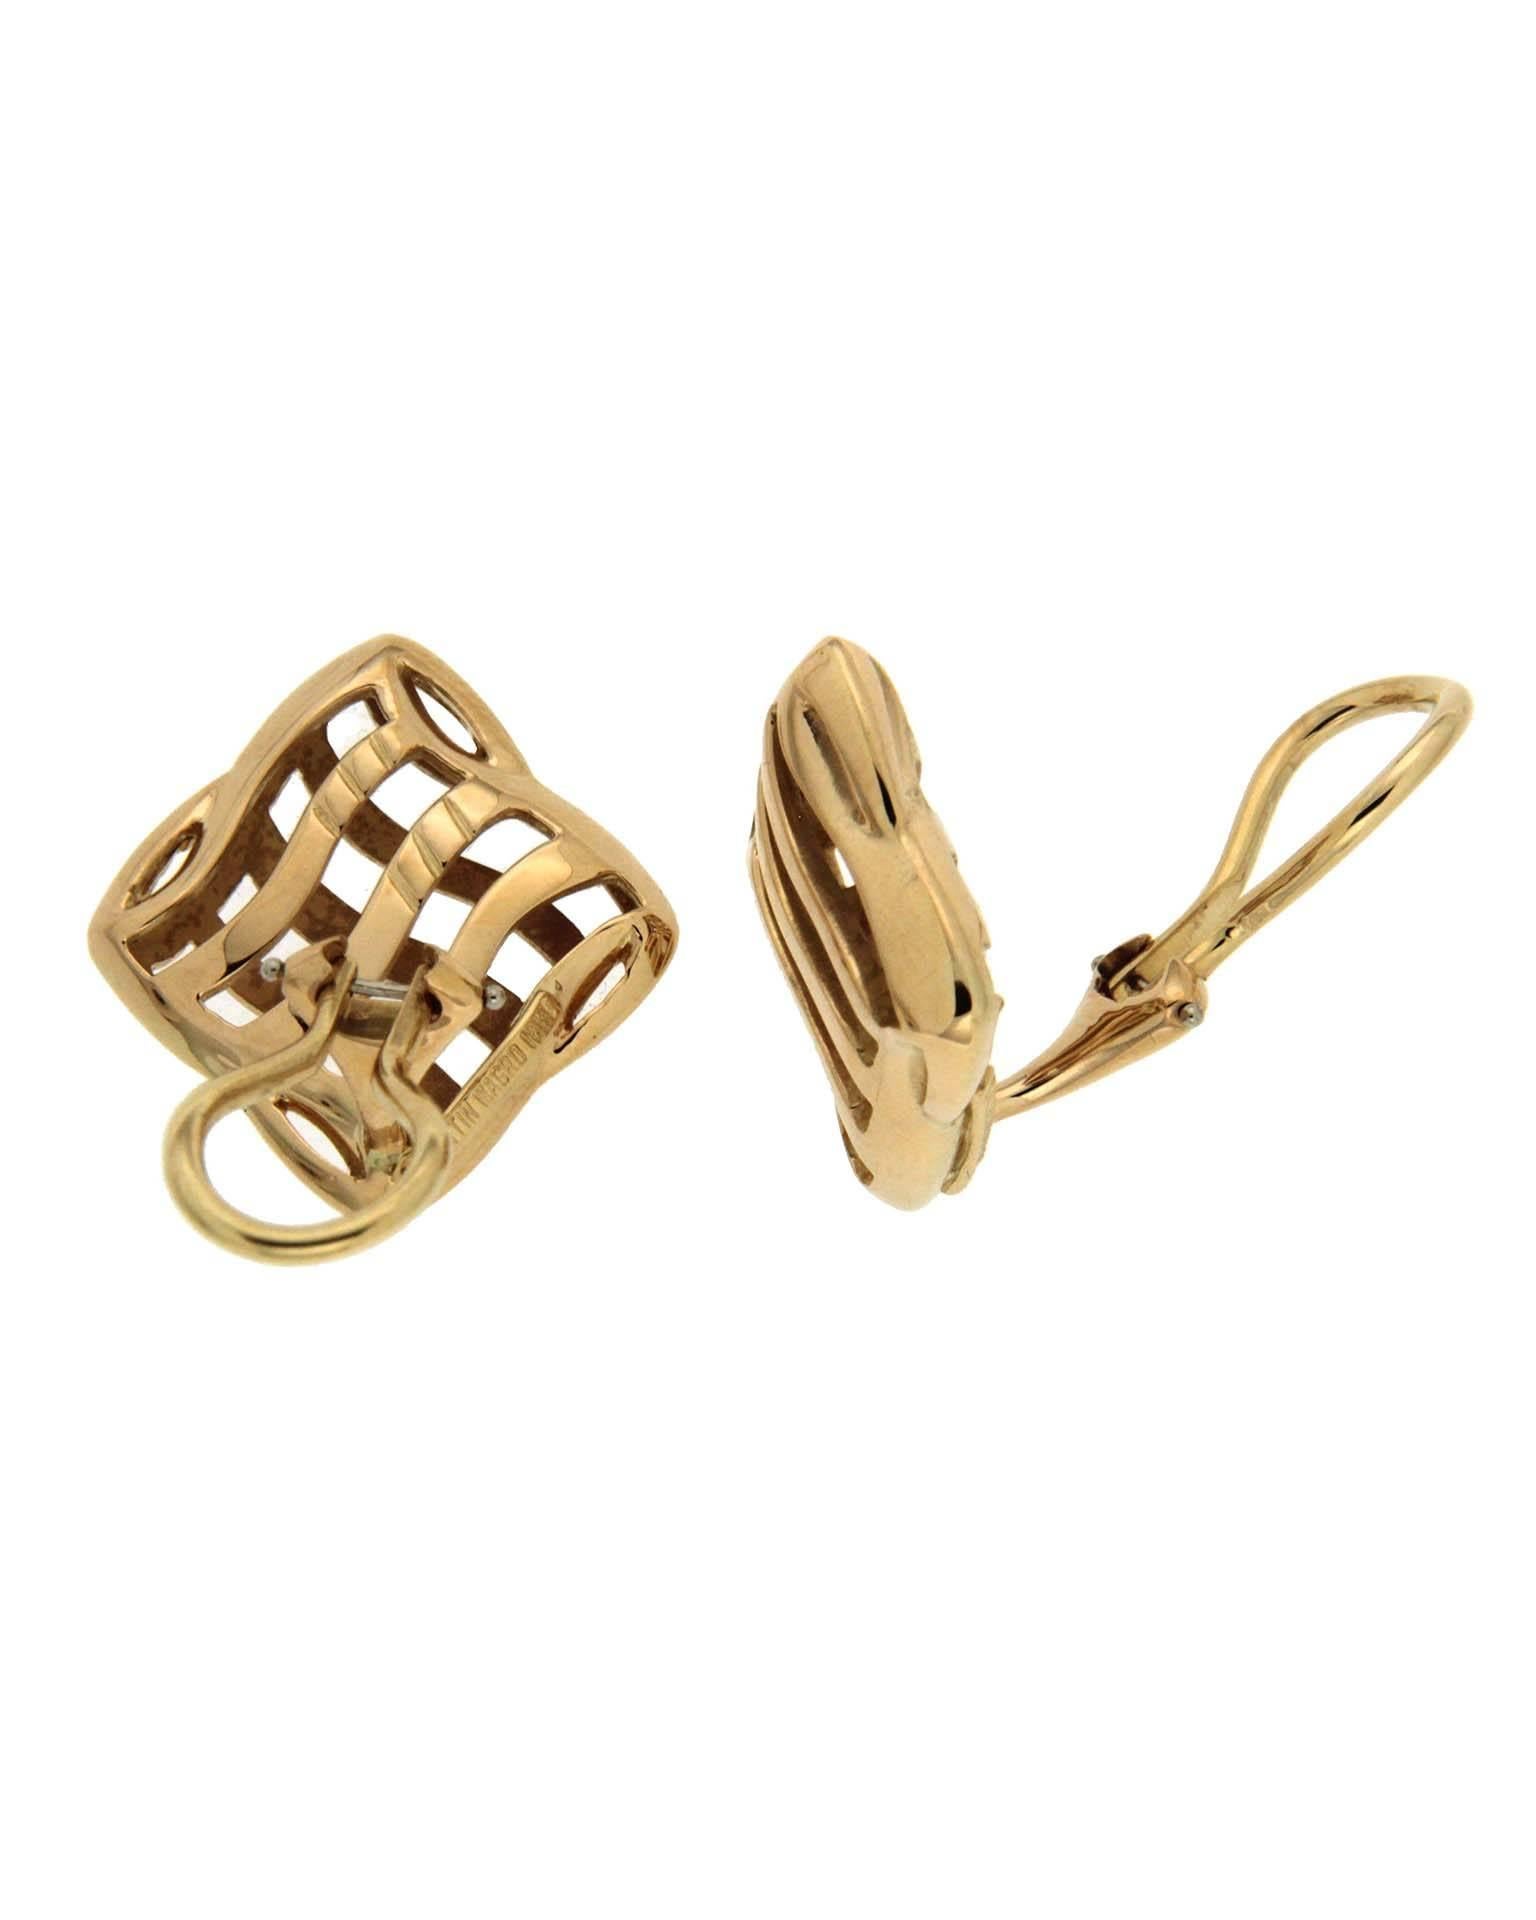 Small Version of Cushion Trellis Over and Under Earrings in 18kt Yellow gold with clip backs.